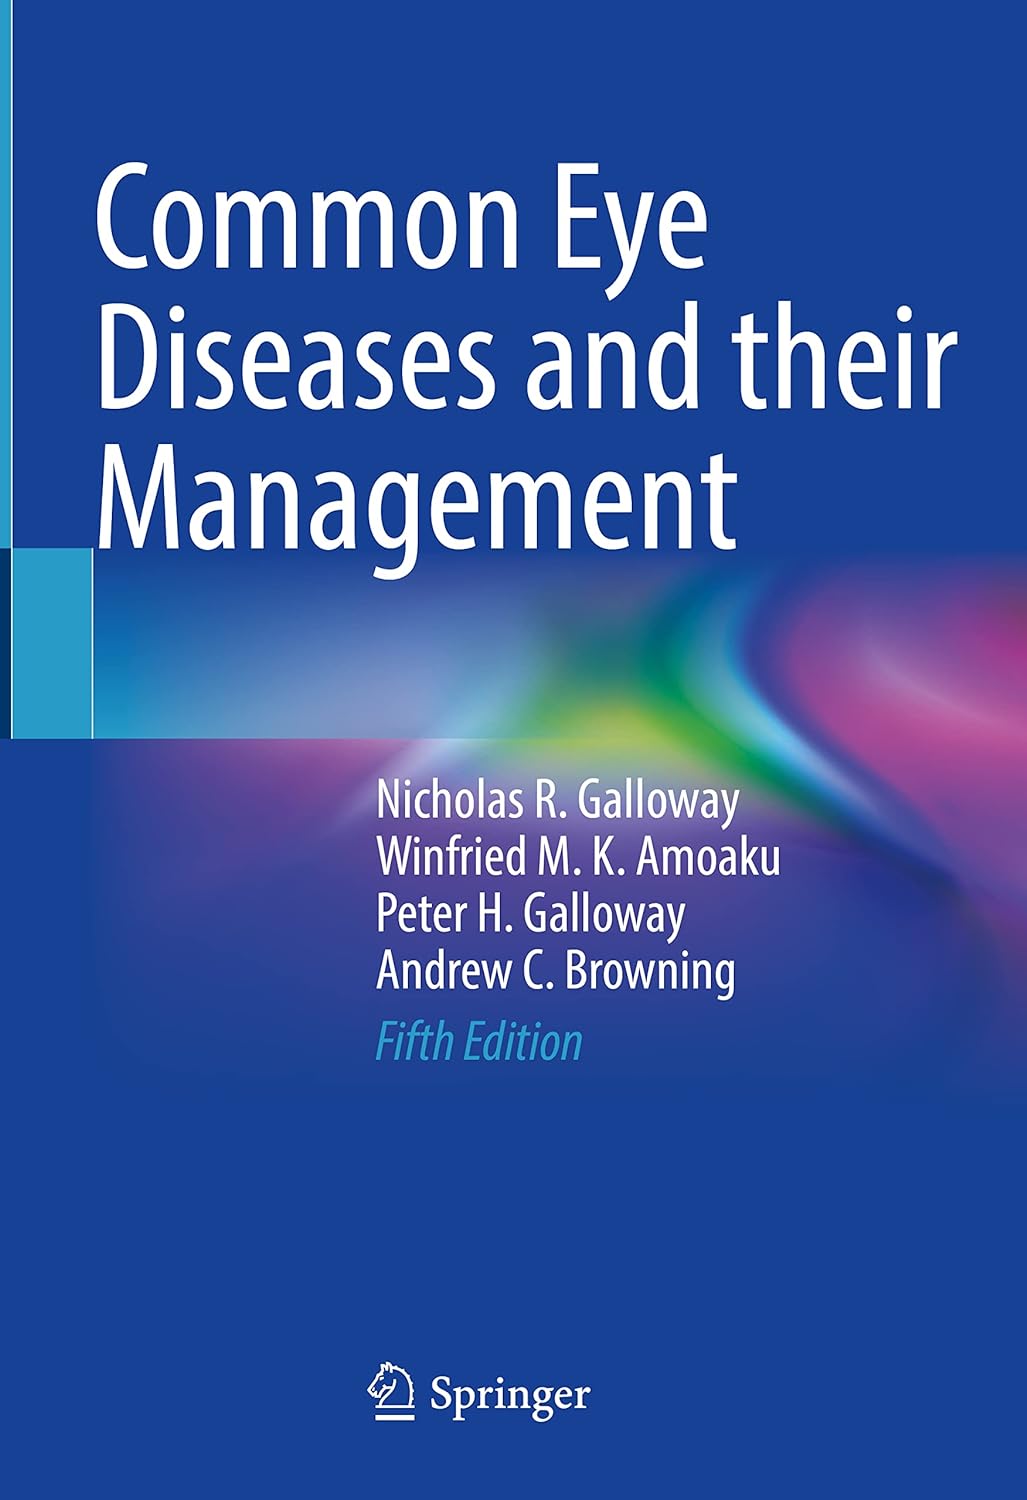 Common Eye Diseases and their Management, 5th Edition by Nicholas R. Galloway